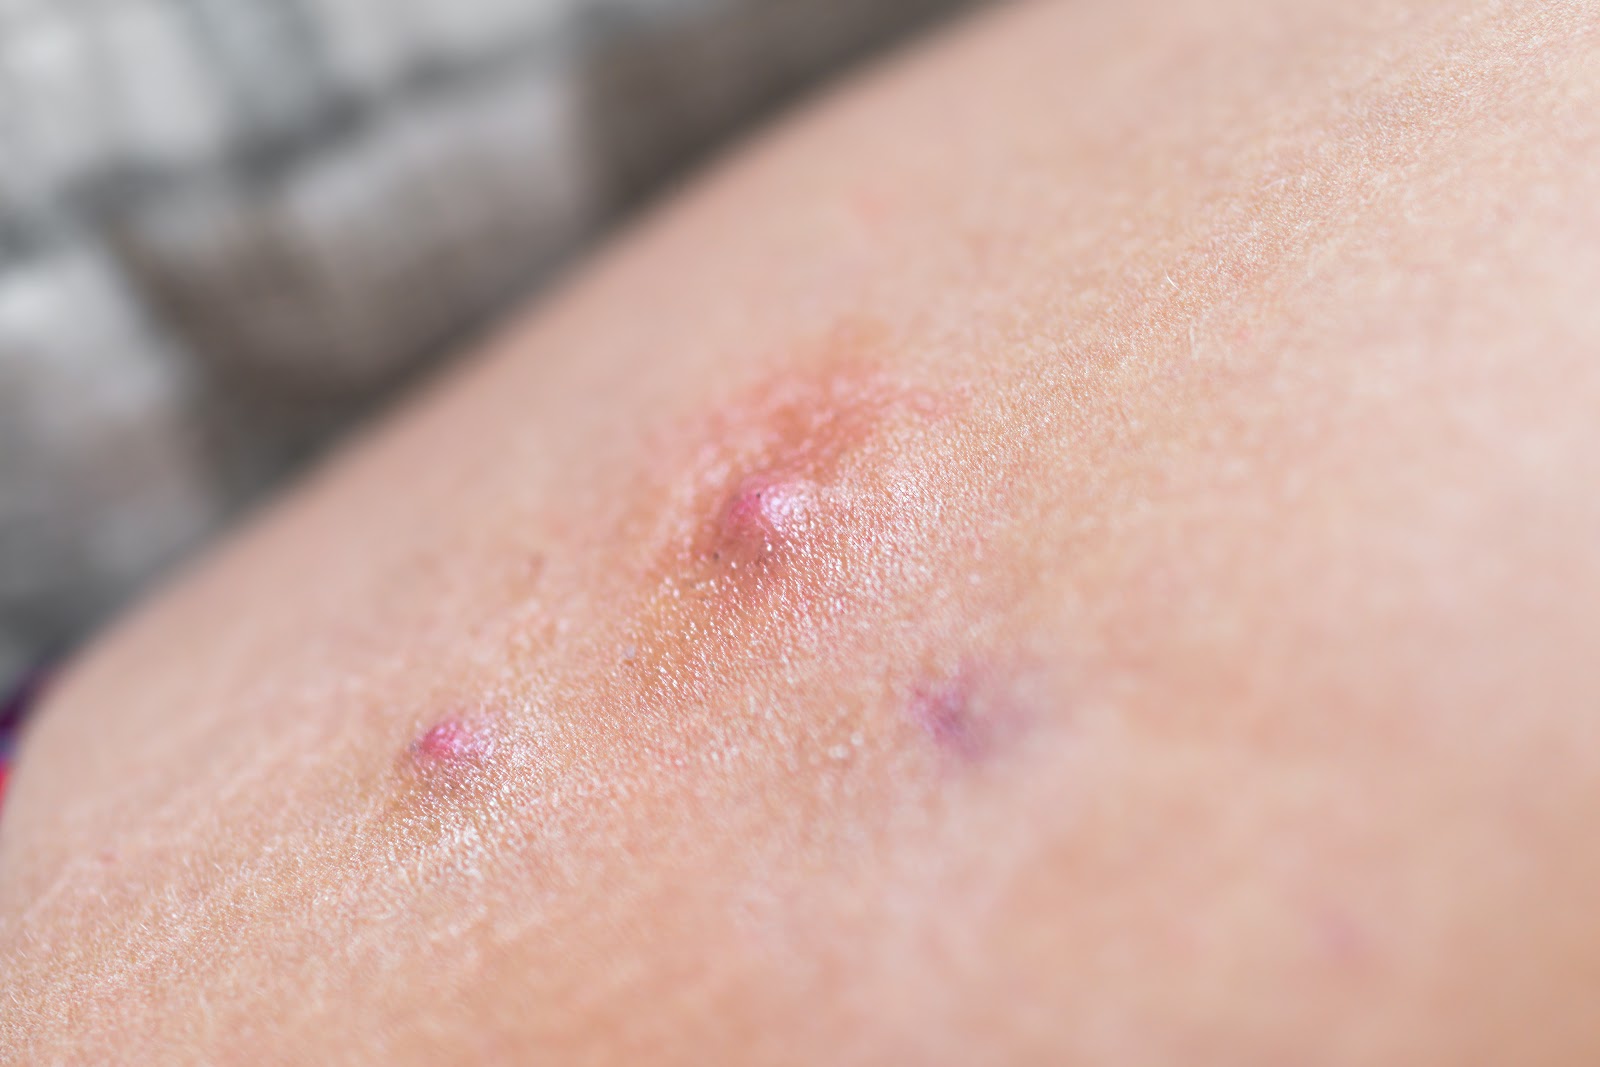 Blemishes on the skin caused by Hidradenitis suppurativa.